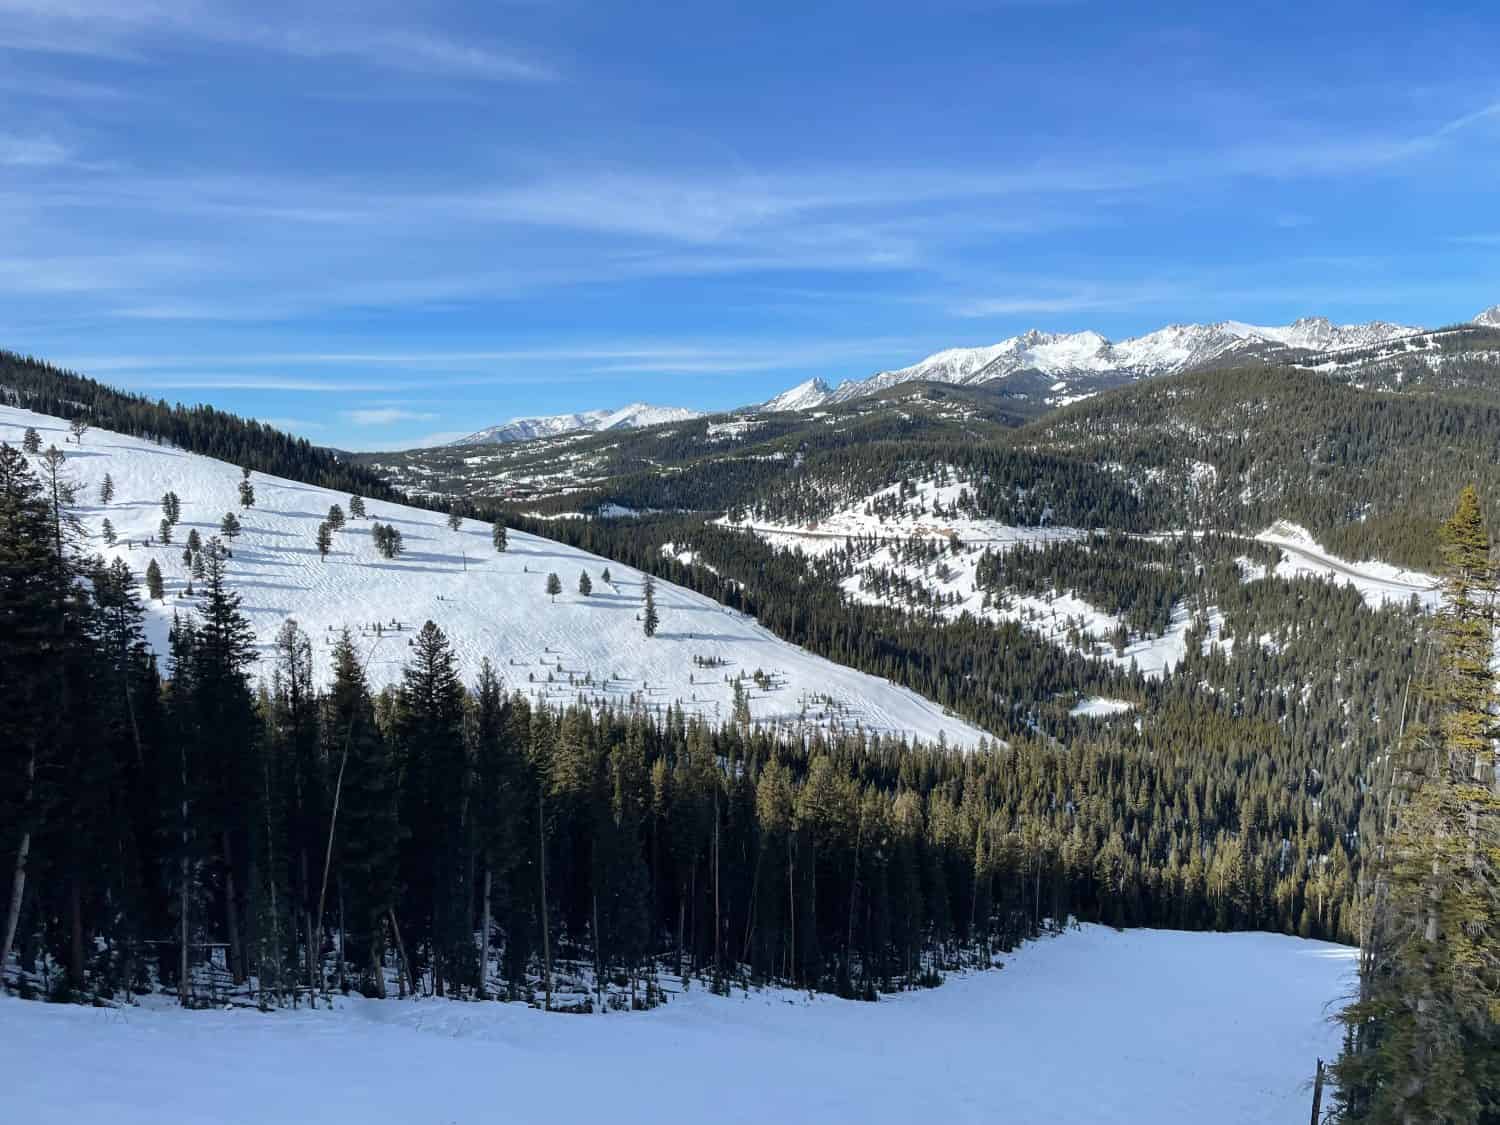 Scenic view of the snow covered peaks and slopes at Big Sky Ski Resort in Montana on a sunny winter day